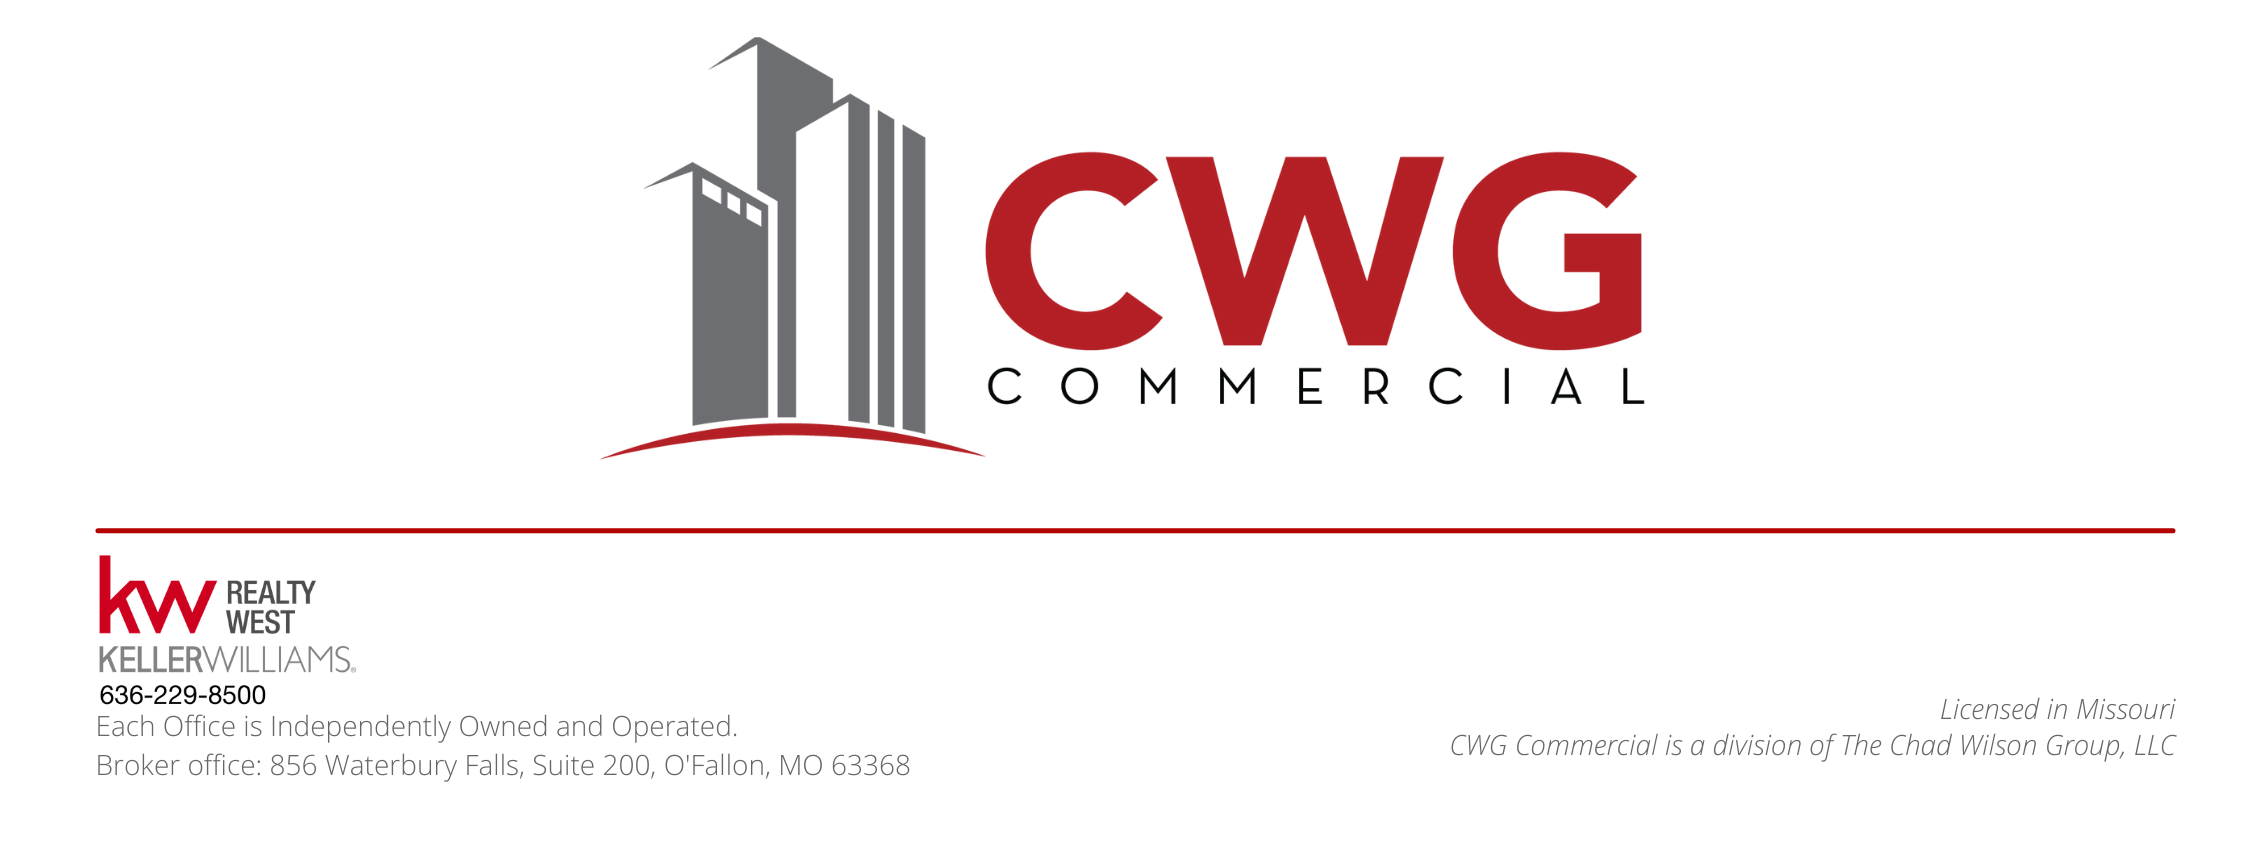 CWG Commercial